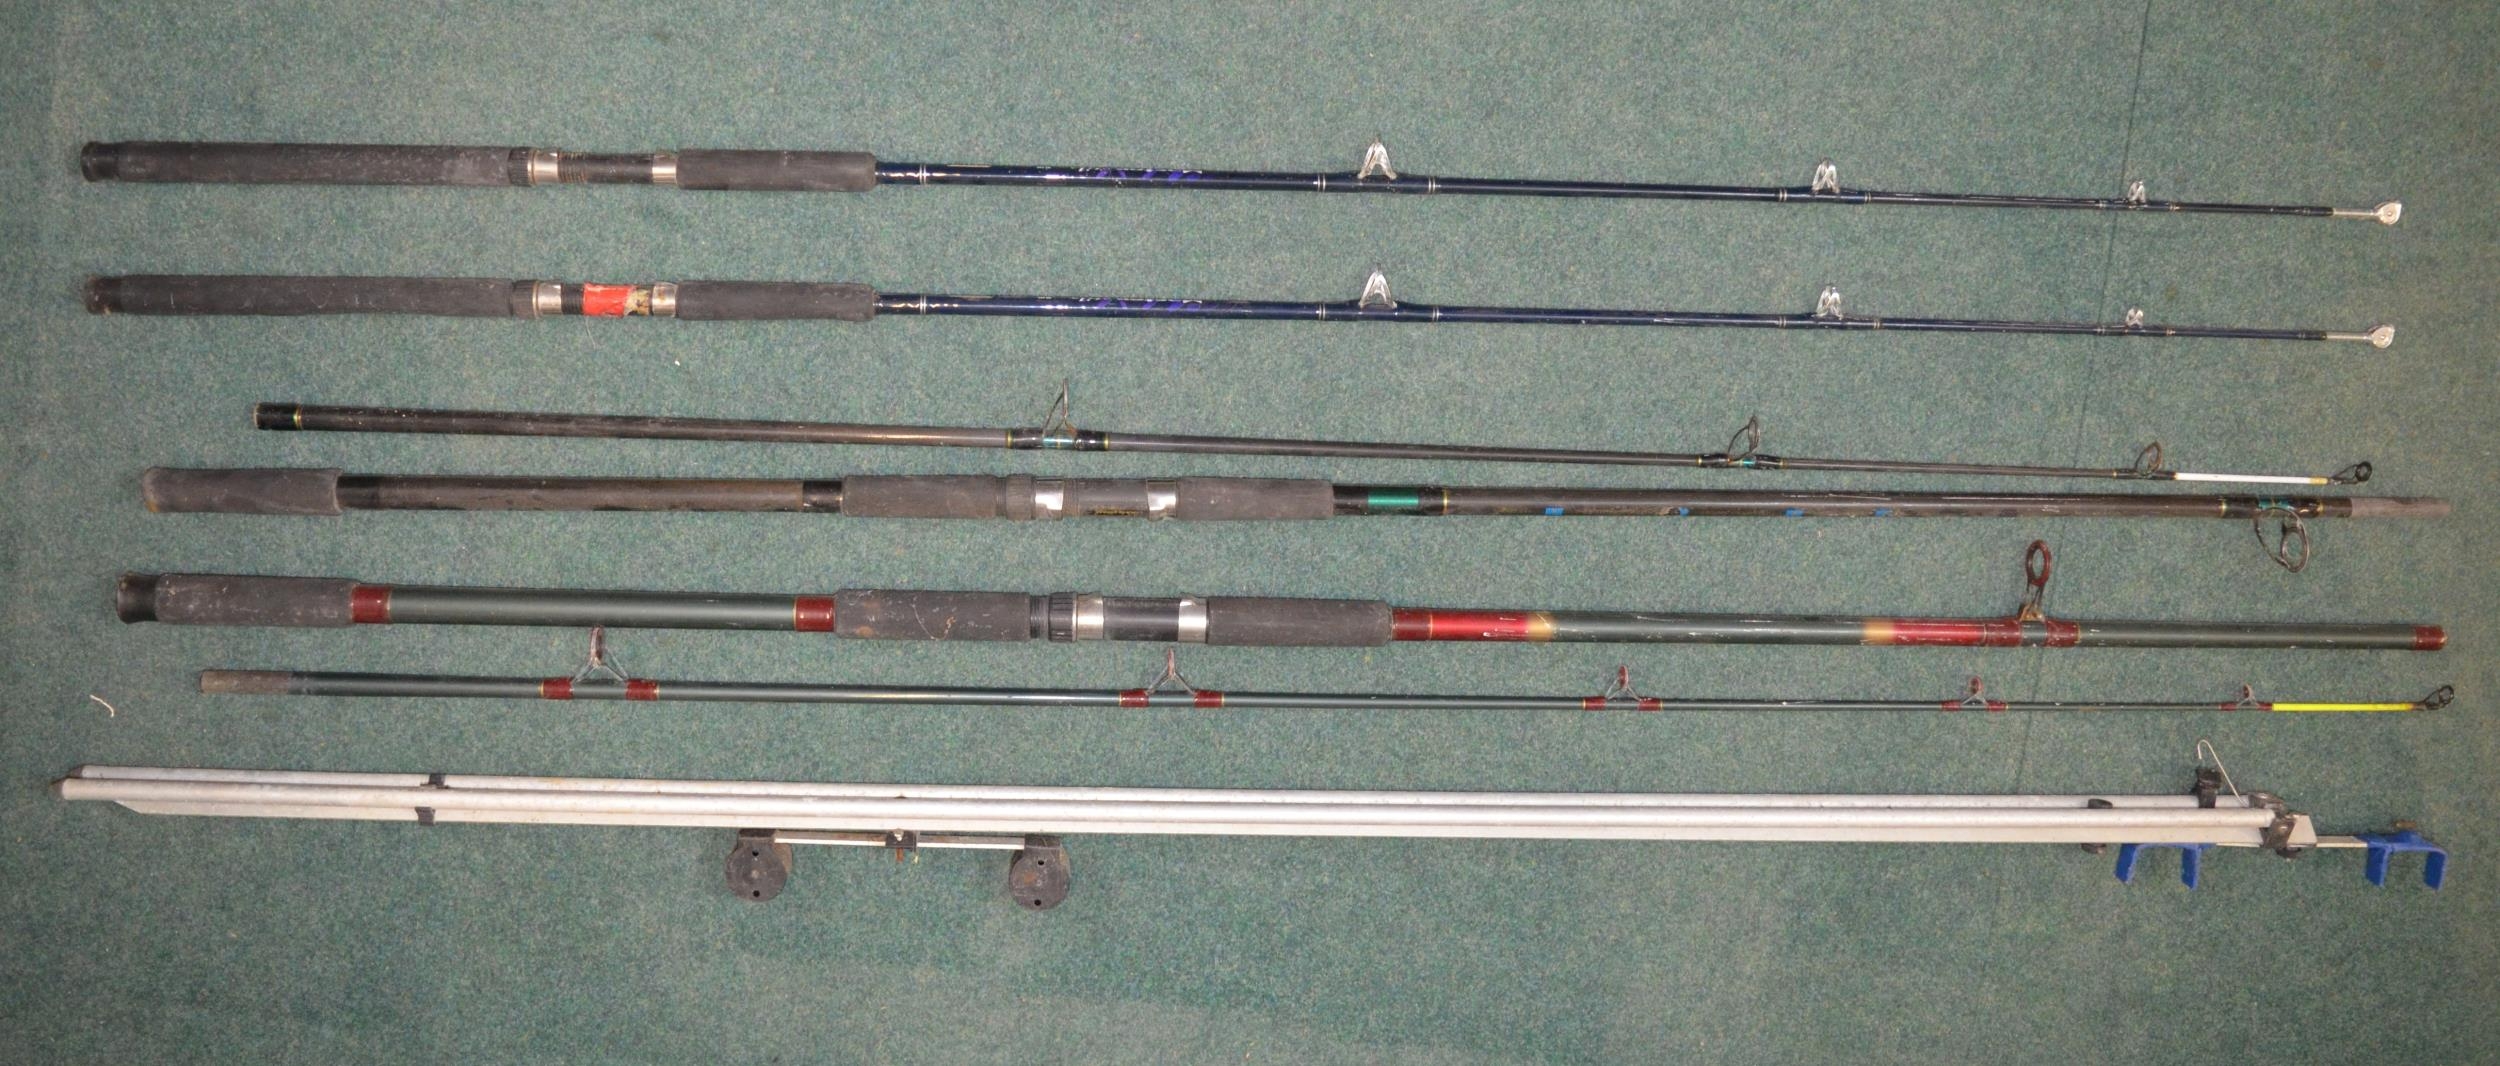 2 6ft boat rods by Master Line, 2 Beachcasters, 1 by Shakespeare L3.6m 2 piece, a Sil Star MXE Power